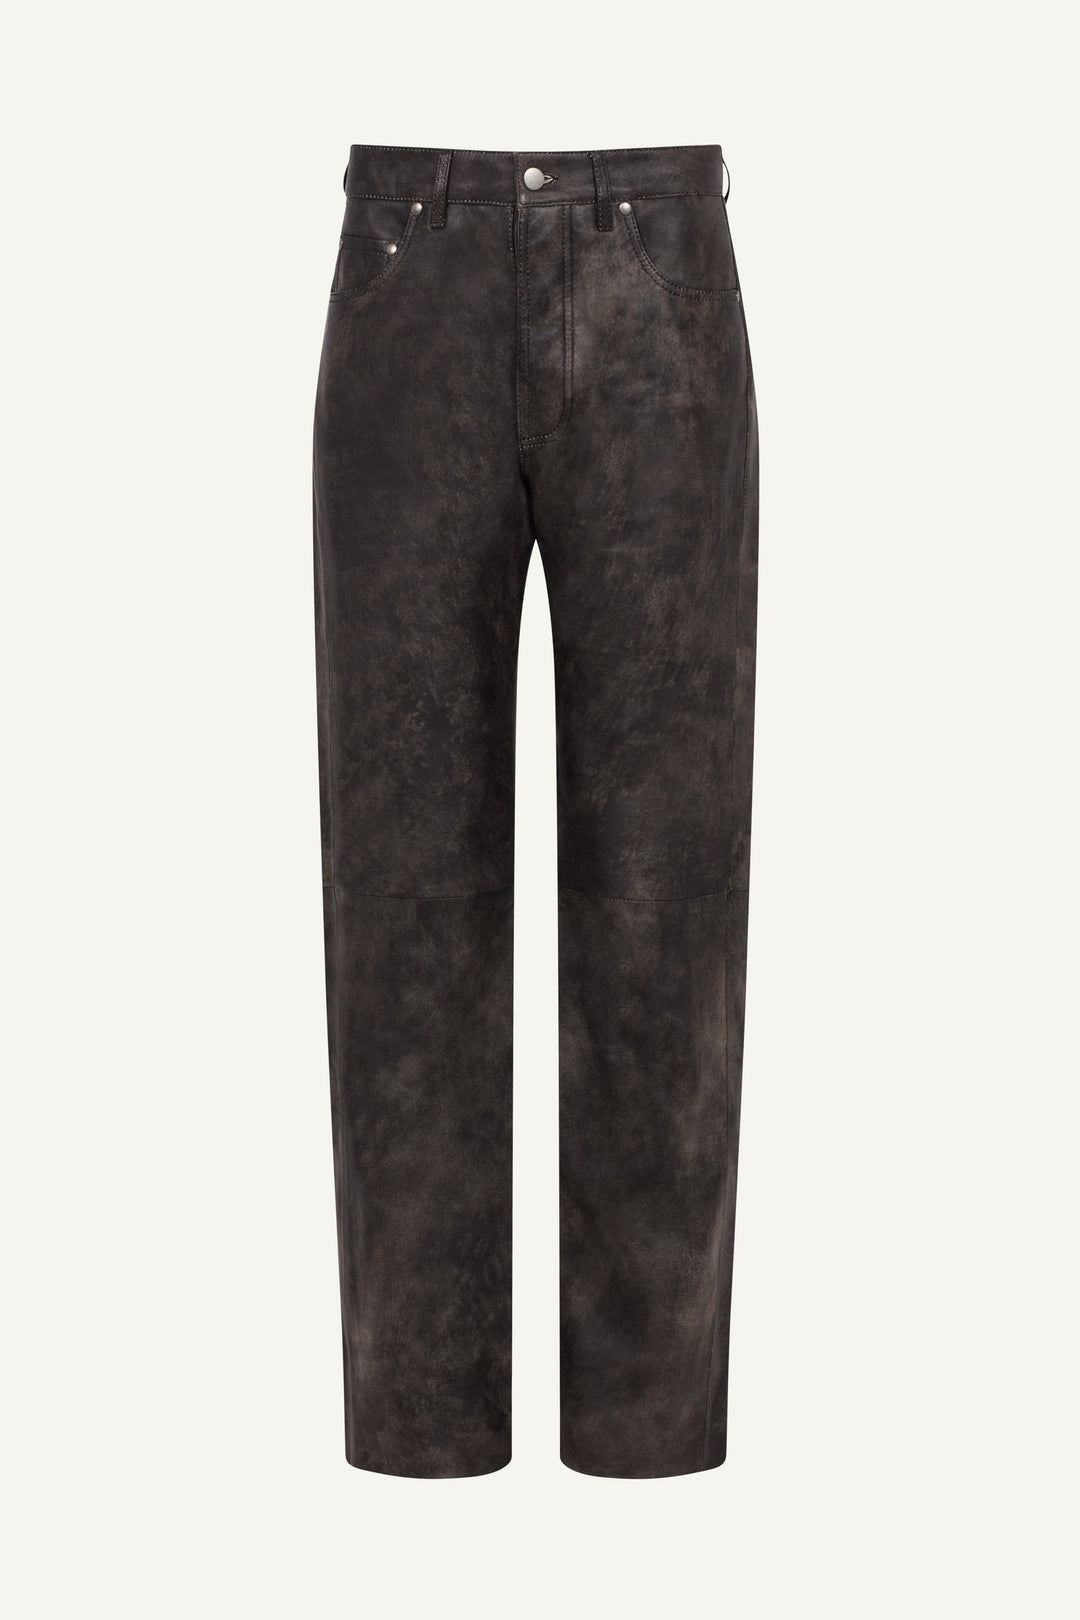 Hailey Distressed Leather Pants